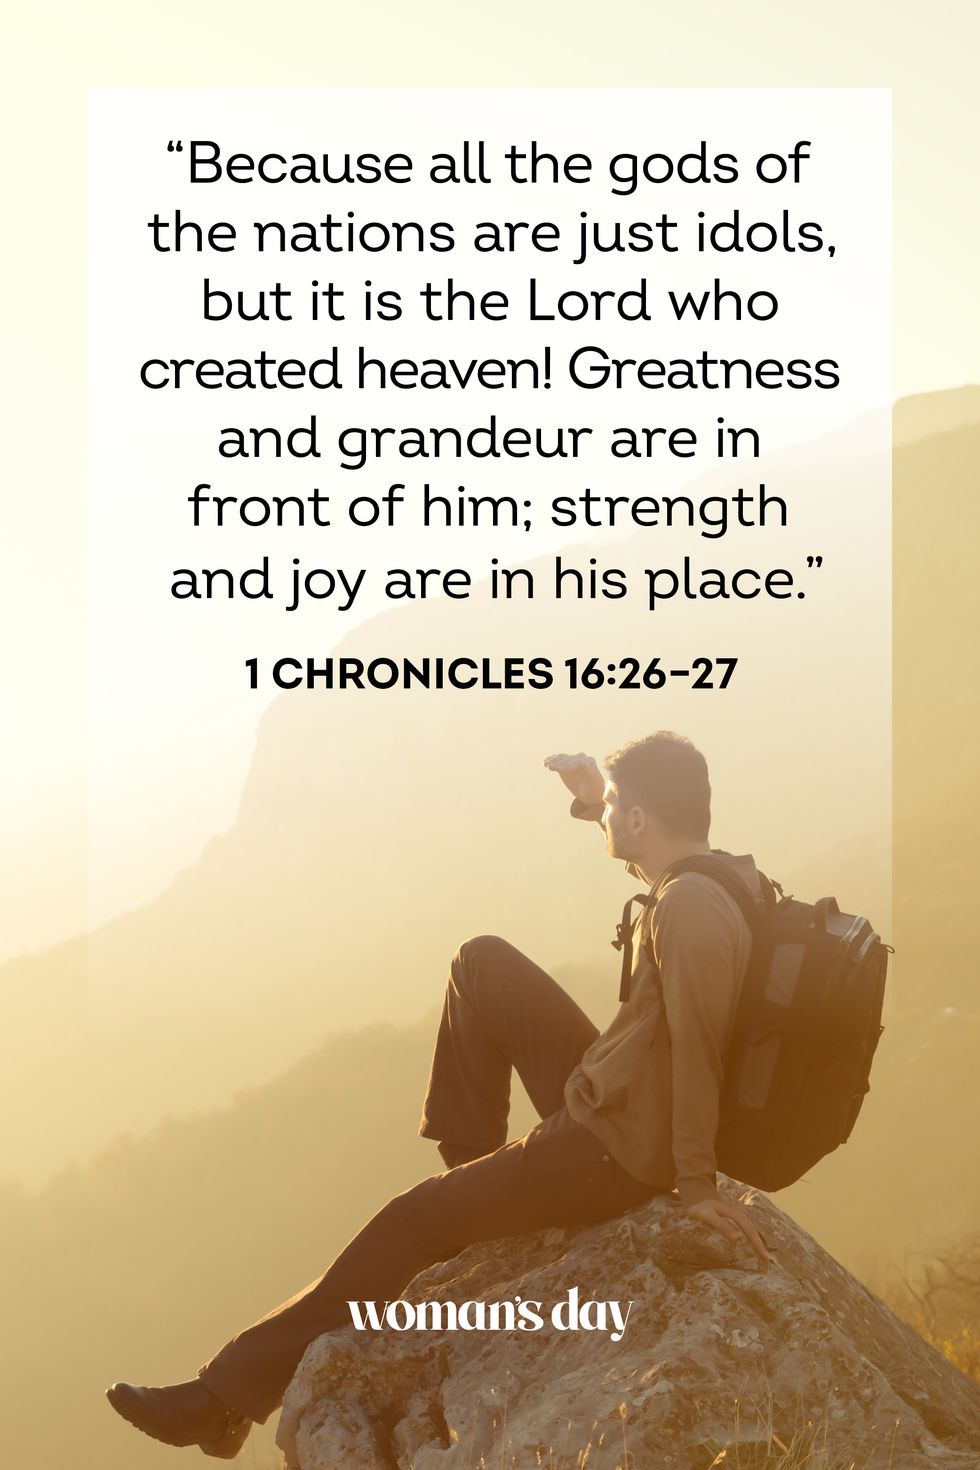 25 Bible Verses about Rejoicing in the Lord — Bible Lyfe